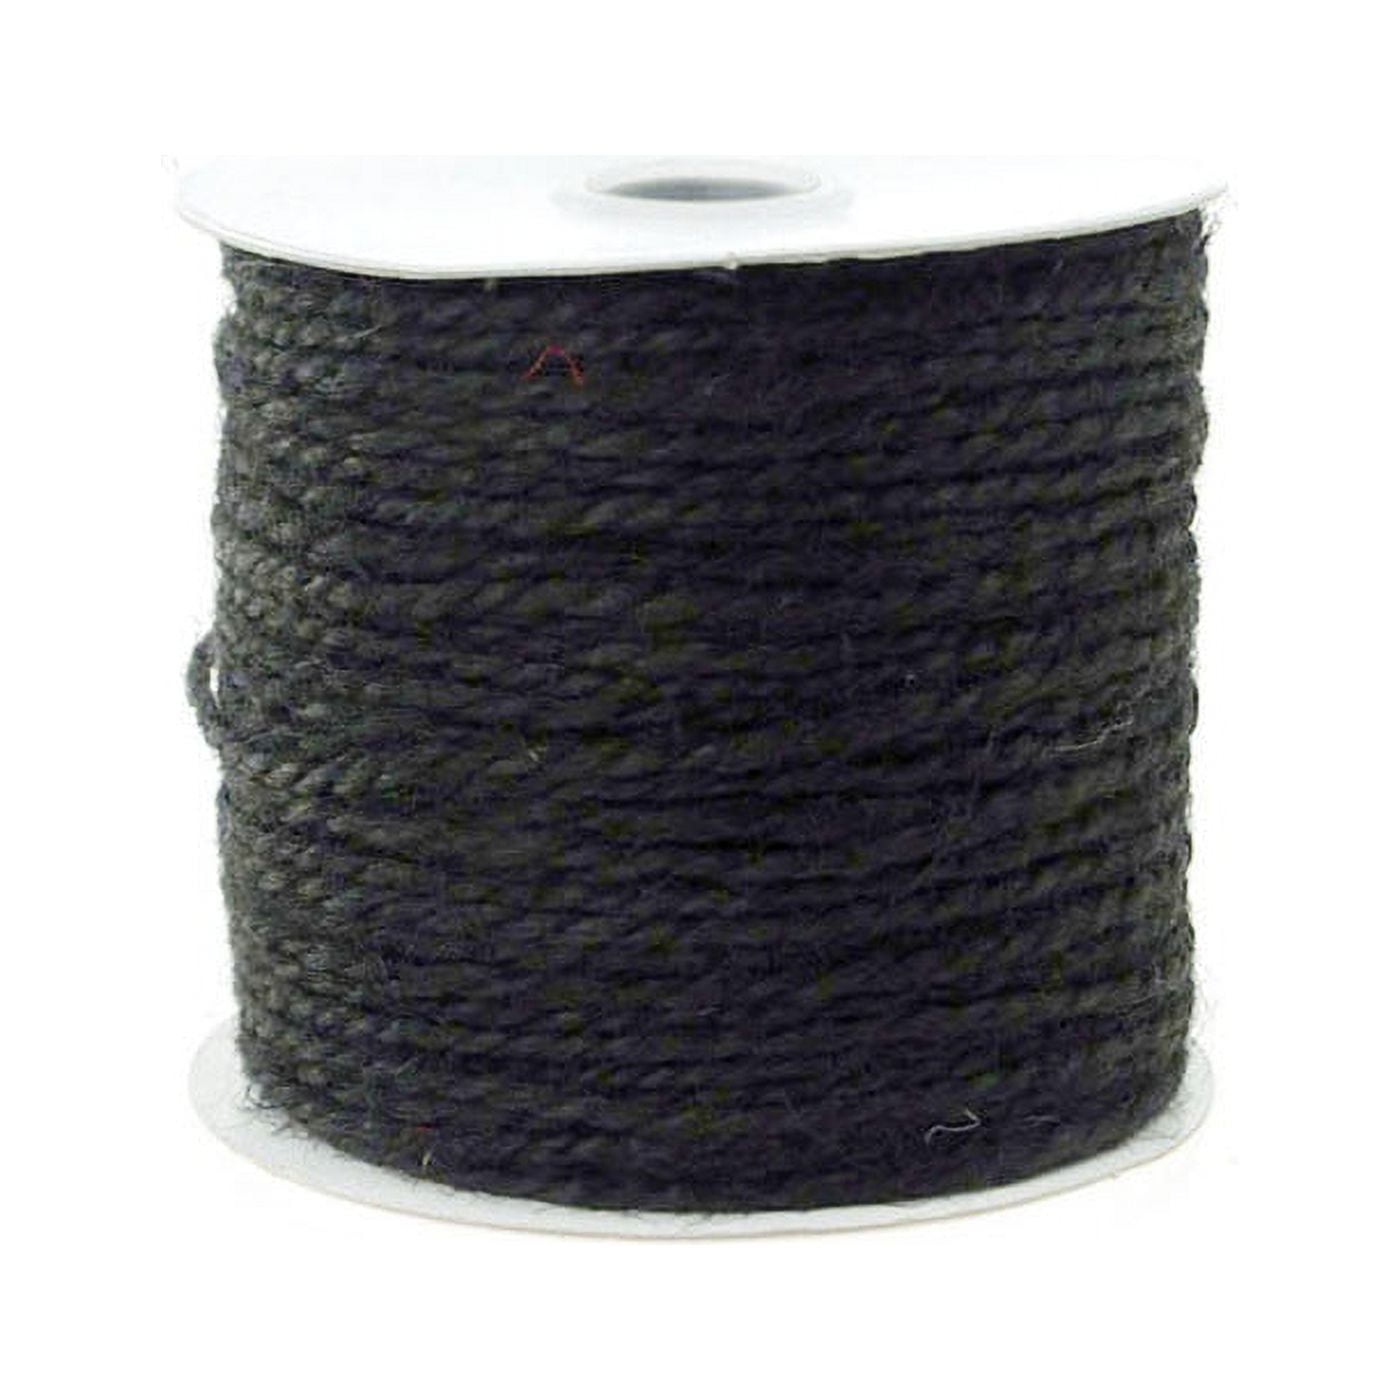 Waxed cord for jewelry making, black, thickness 1.5mm, 2m